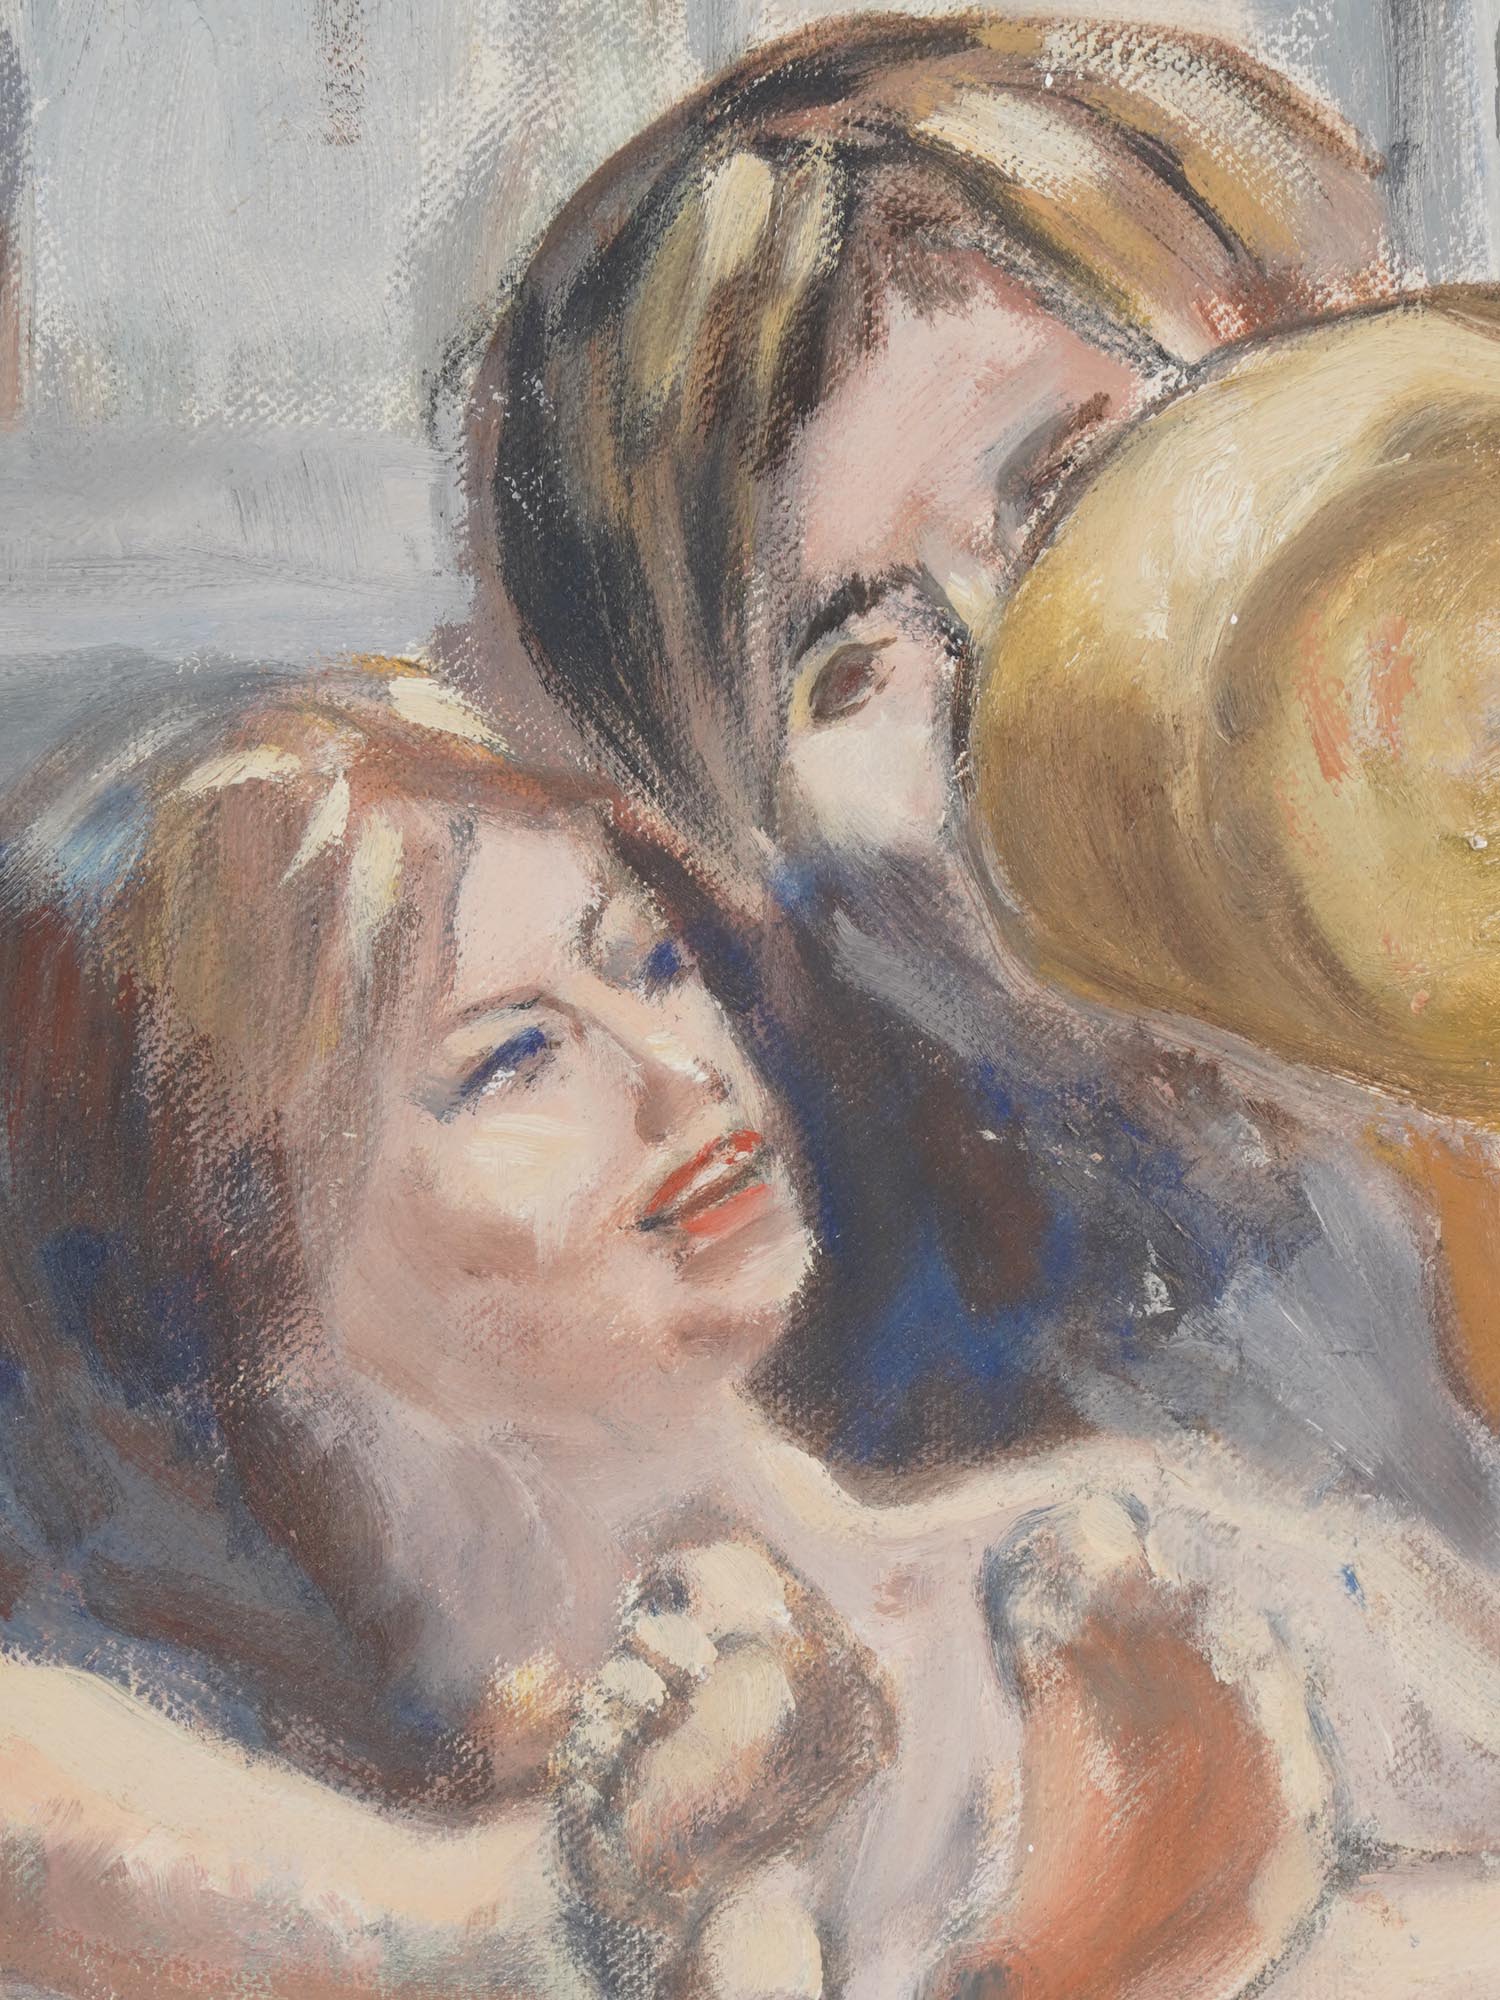 COUPLE IN BATH OIL PAINTING IN MANNER OF BURLIUK PIC-2